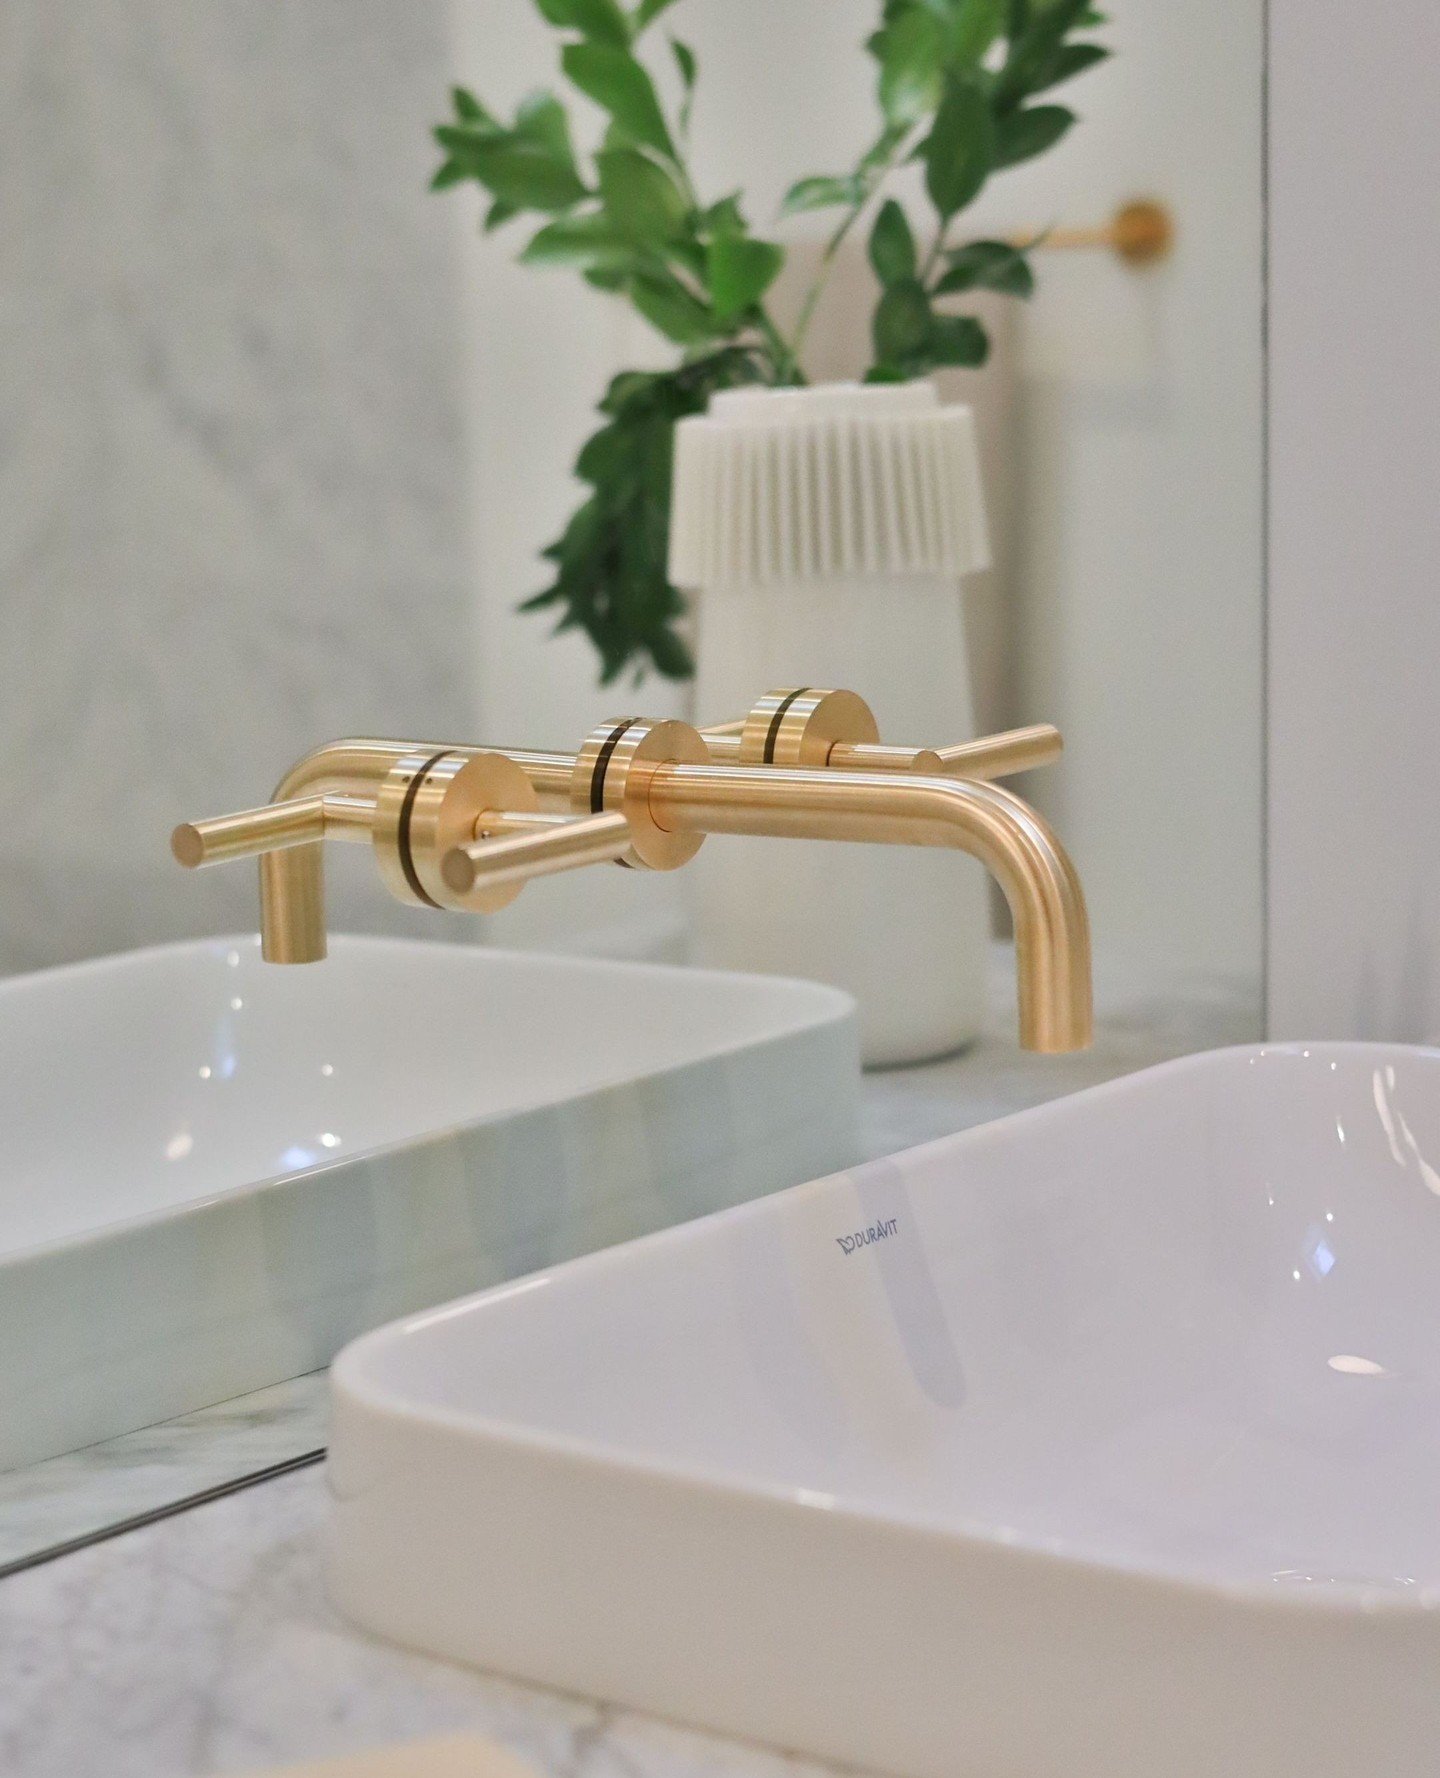 Freshen up your bathroom projects this spring with beautiful brass touches to add the perfect combination of luxury and elegance ✨⁠
⁠
Looking for expert advice on finishes? Head to the link in bio to book an appointment.